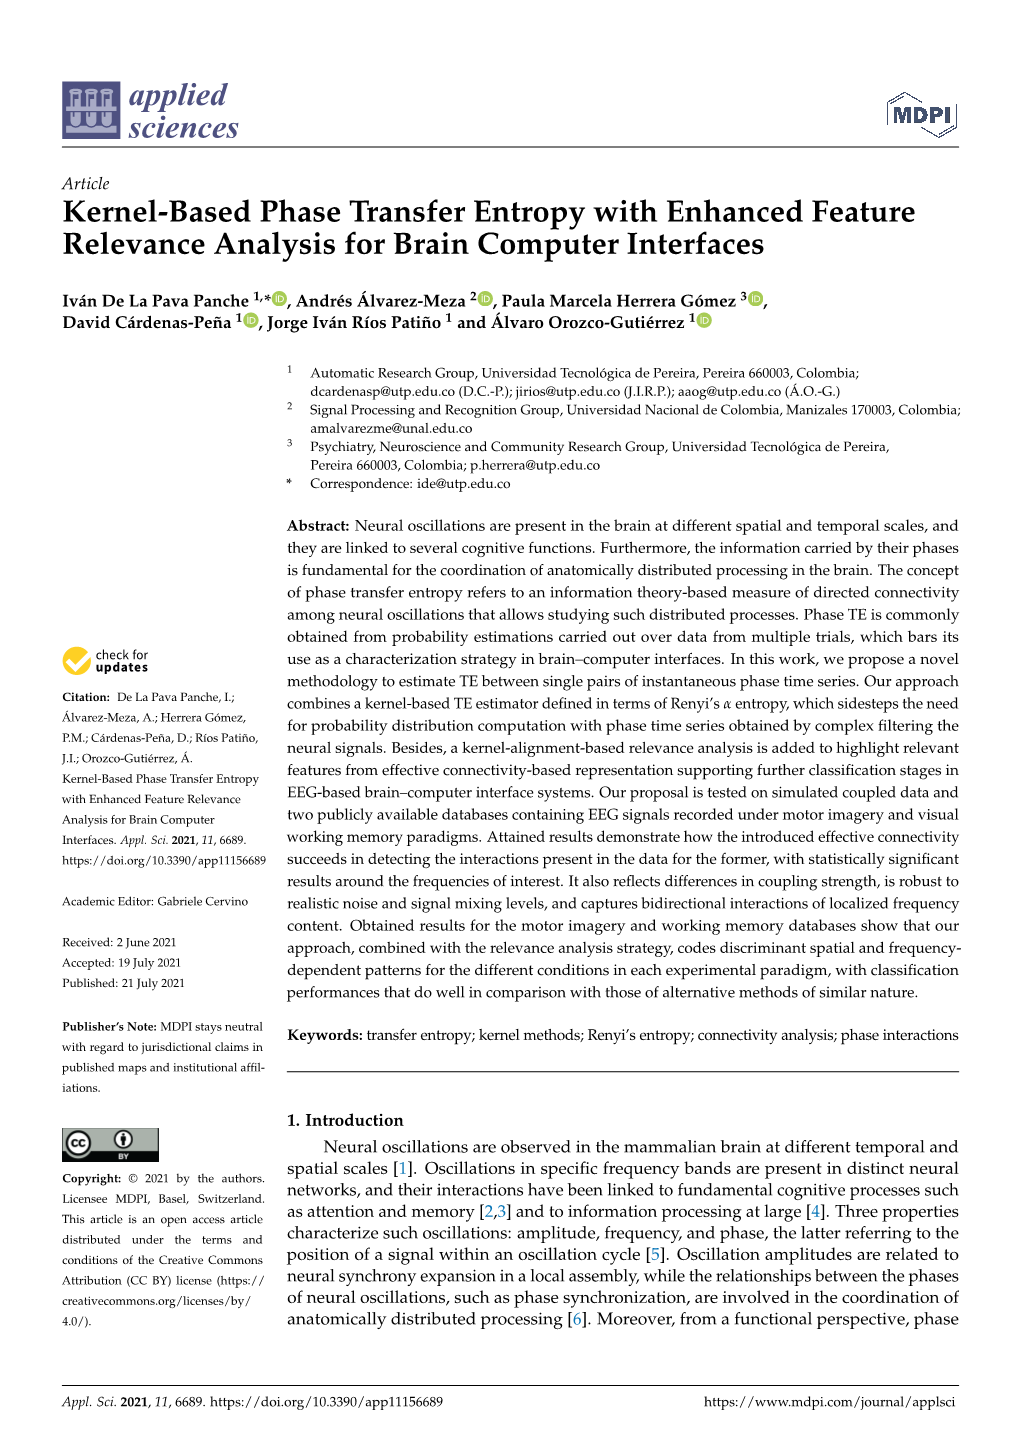 Kernel-Based Phase Transfer Entropy with Enhanced Feature Relevance Analysis for Brain Computer Interfaces